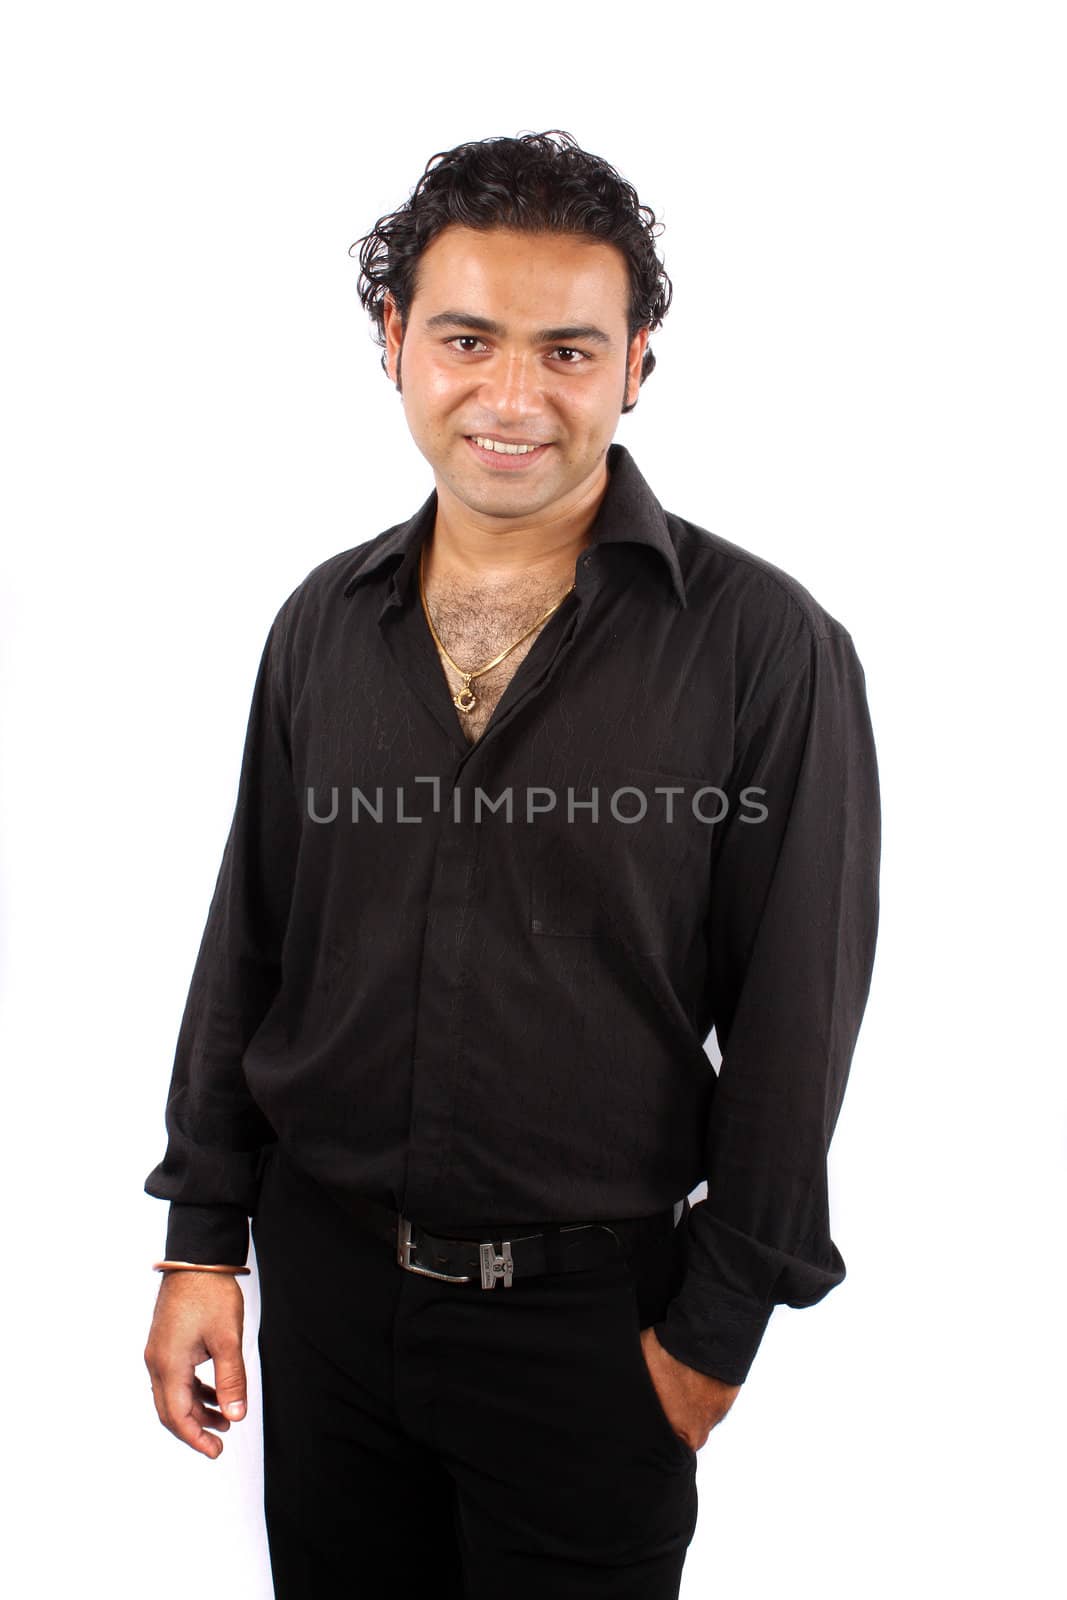 A handsome Indian guy in a black dress, on white studio background.